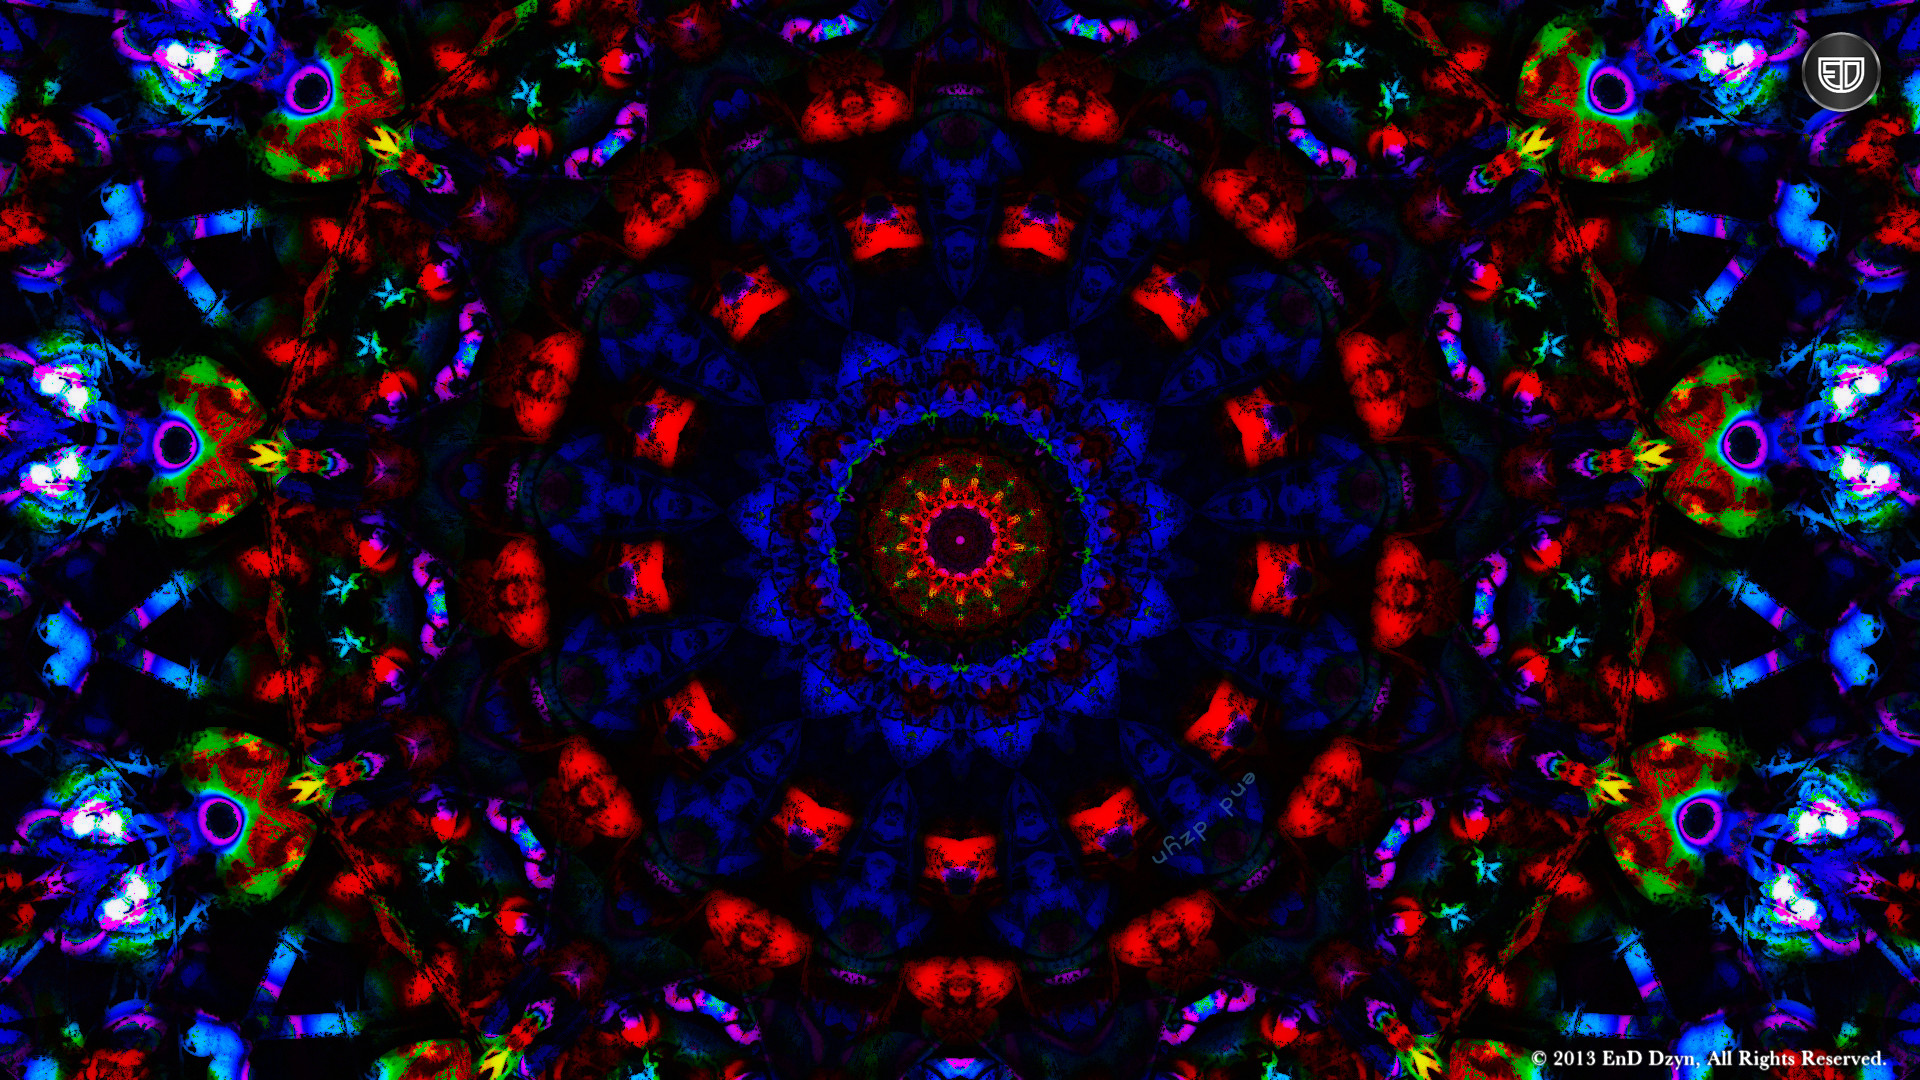 Wallpaper Background Colorful Trippy 3d Psychedelic - Wallpaper - 1920x1080  Wallpaper 